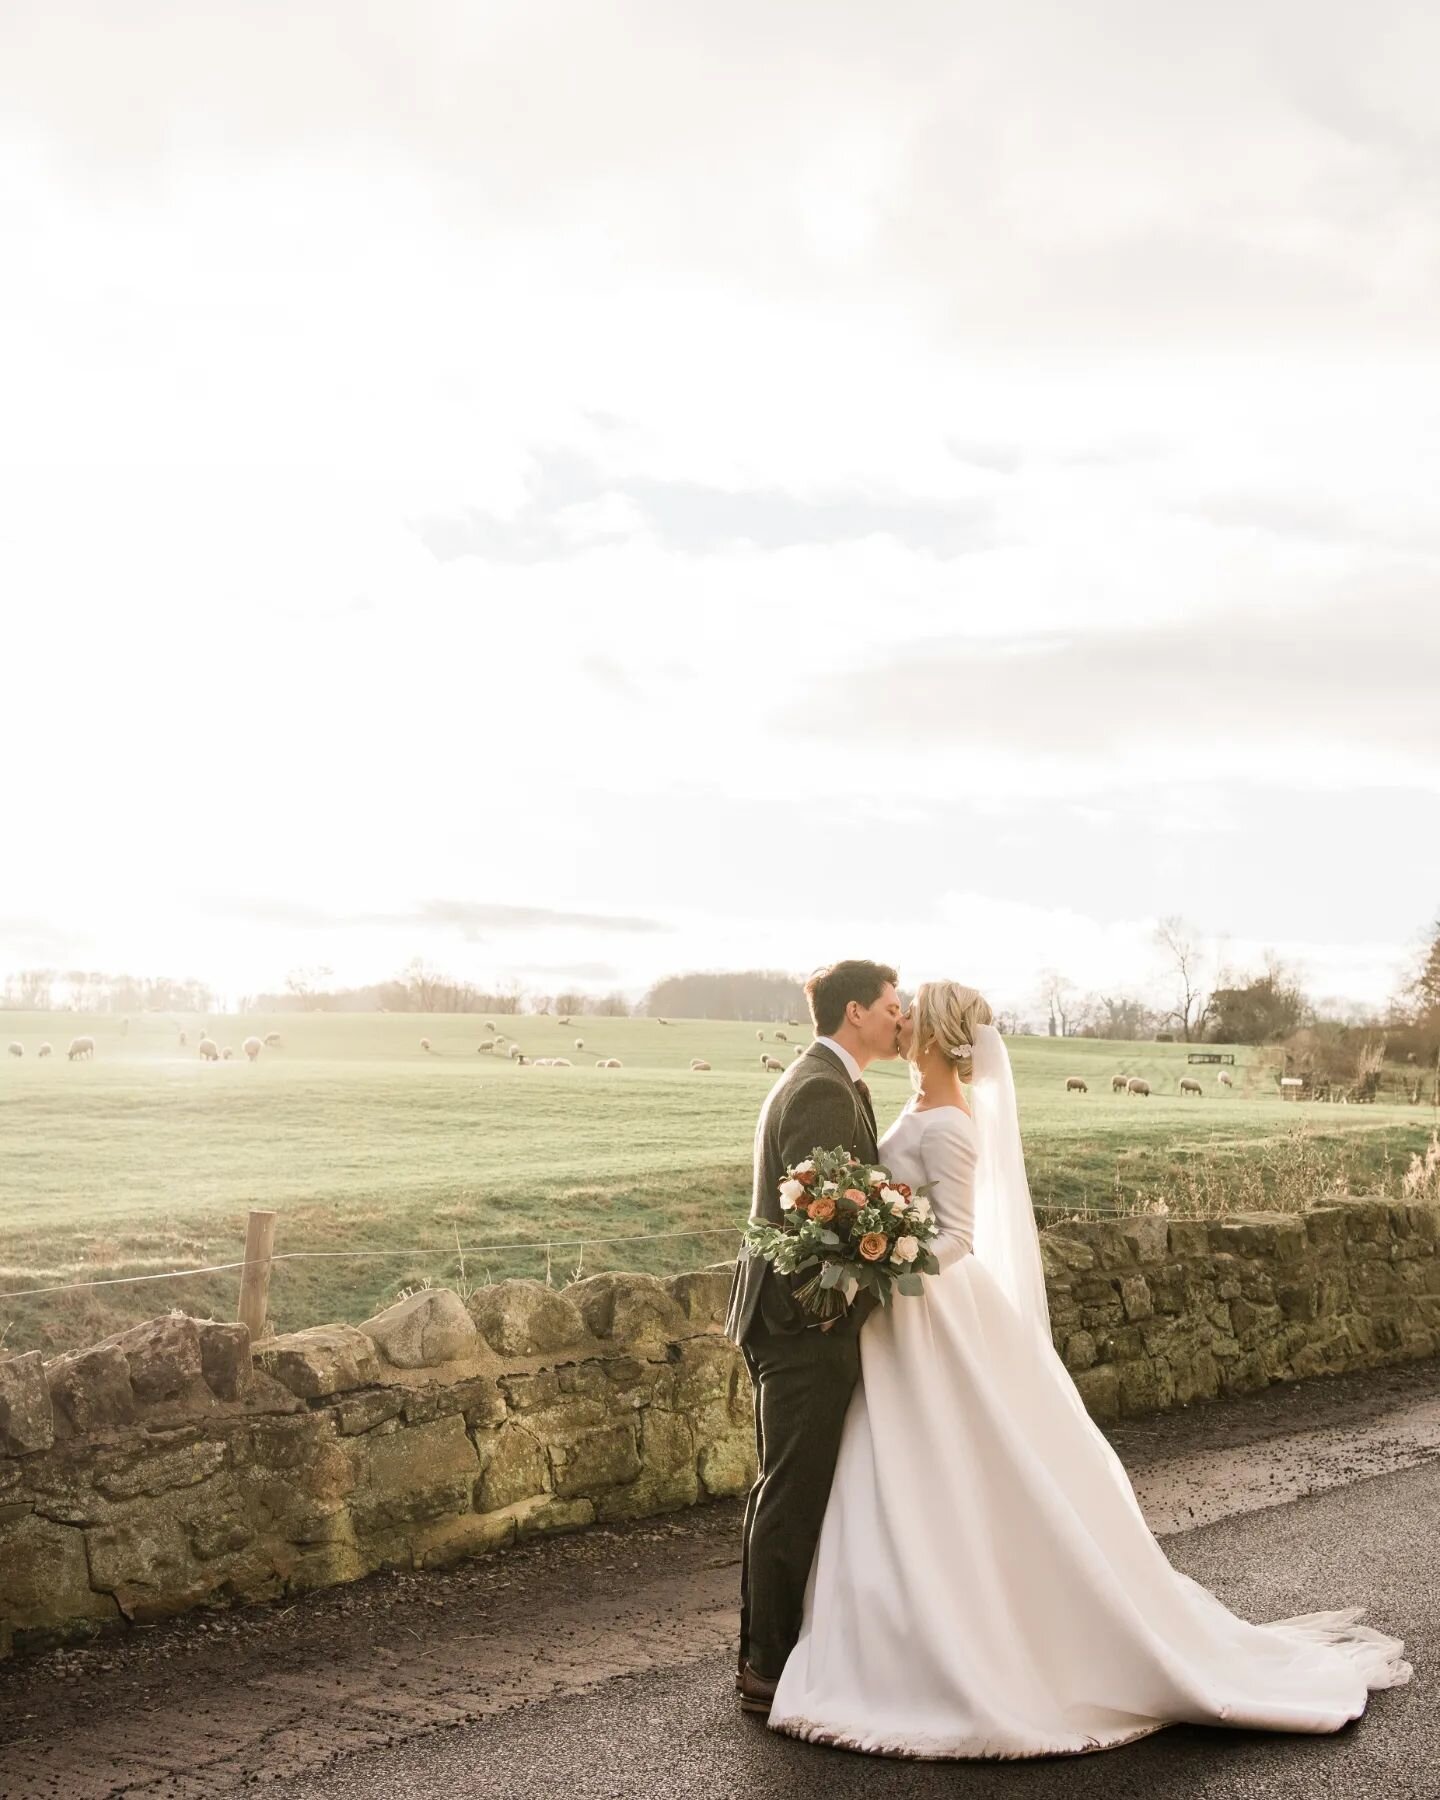 A special end to a wonderful year of weddings with Sophie &amp; Craig's incredible day! Such a joy to be able to capture it for them. The winter light was magic ☆

Video @wewerehere.uk
Venue @doxfordbarns 
MUA @mubyleigh
Dress @suzanneneville 
Floral